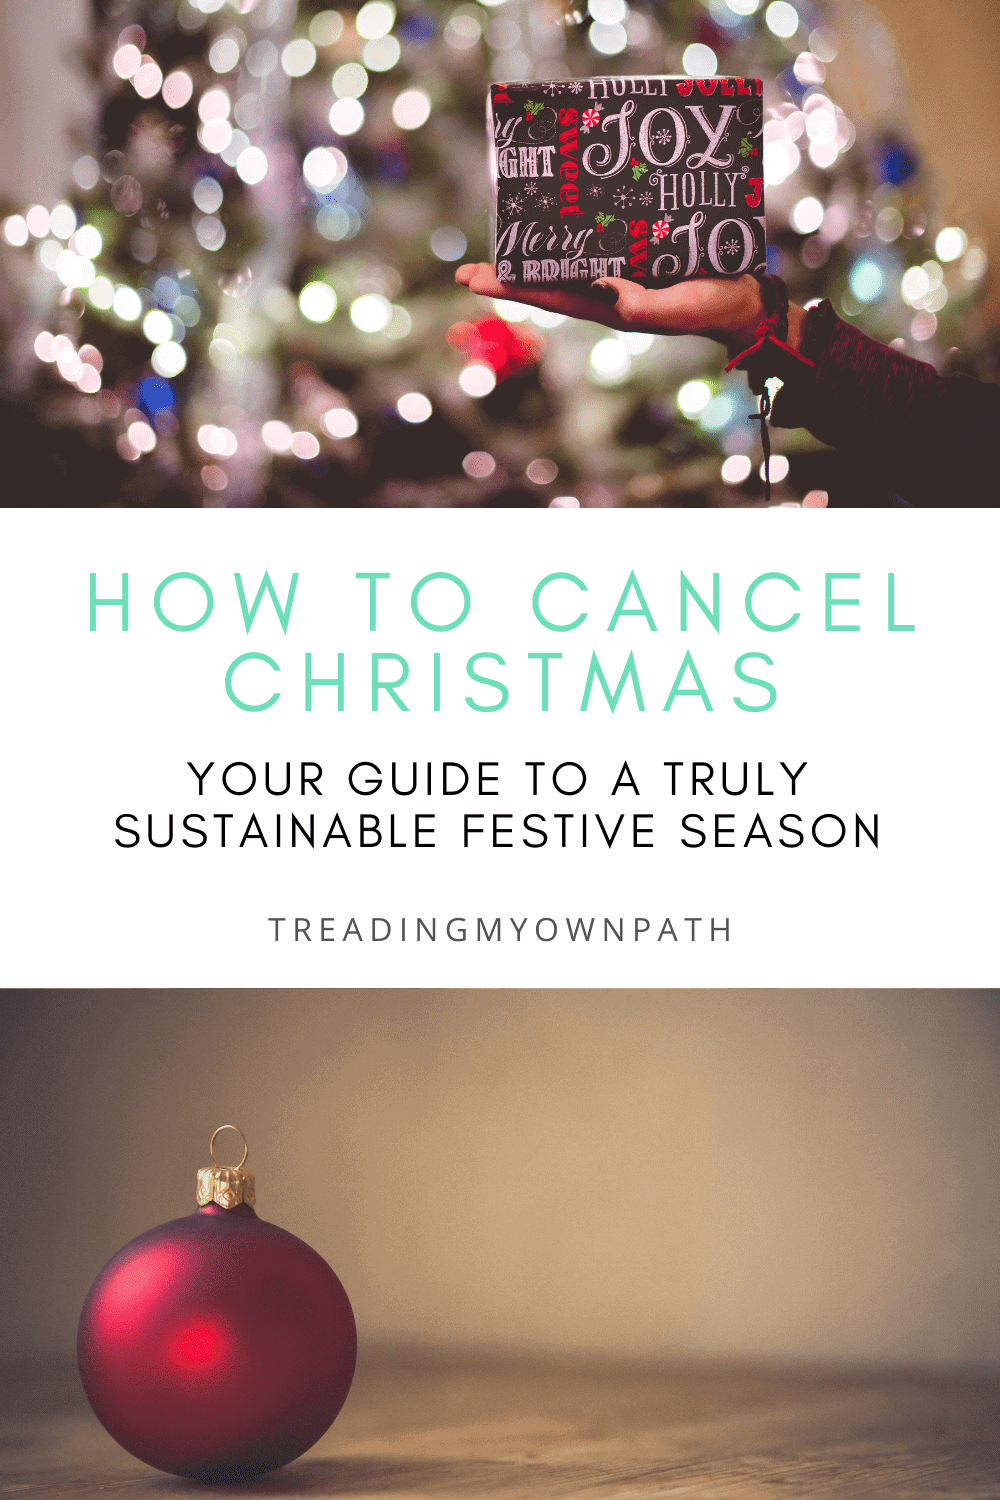 How to cancel Christmas (your guide to a truly sustainable festive season)